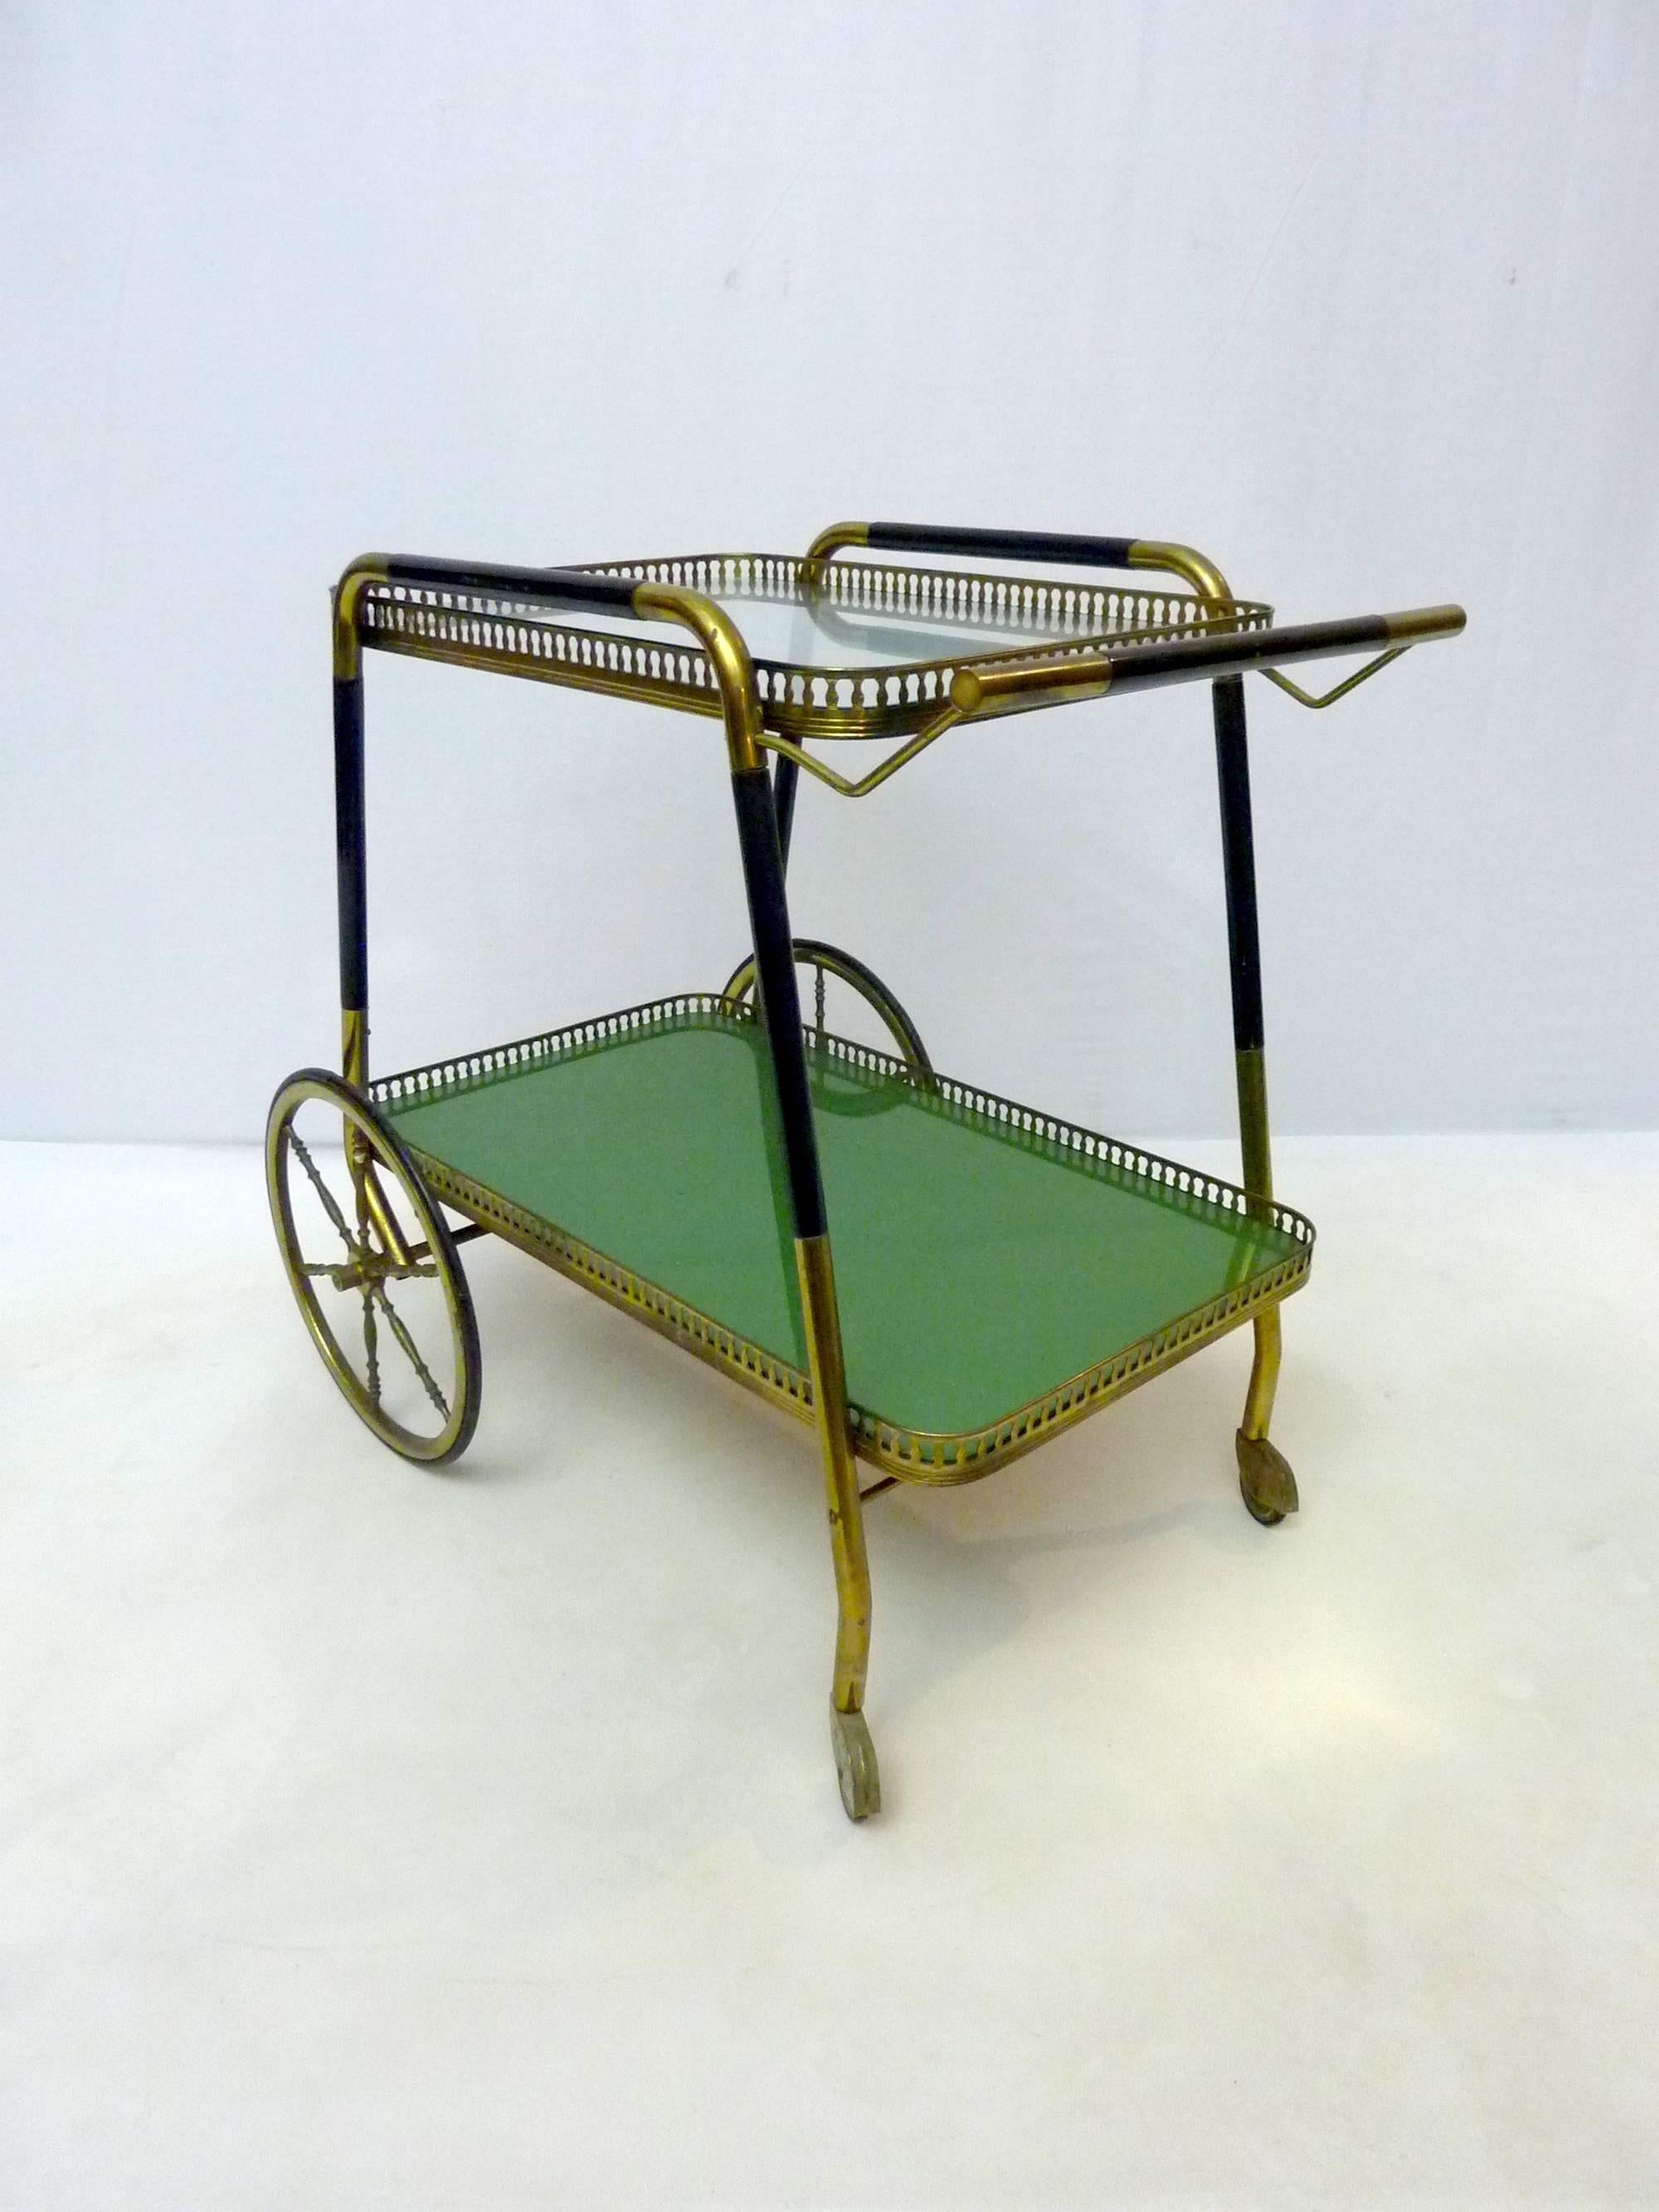 Classic Cesare Lacca two-tiered bar trolley. The bottom shelf has a glass with a green layer underneath and the top is clear.